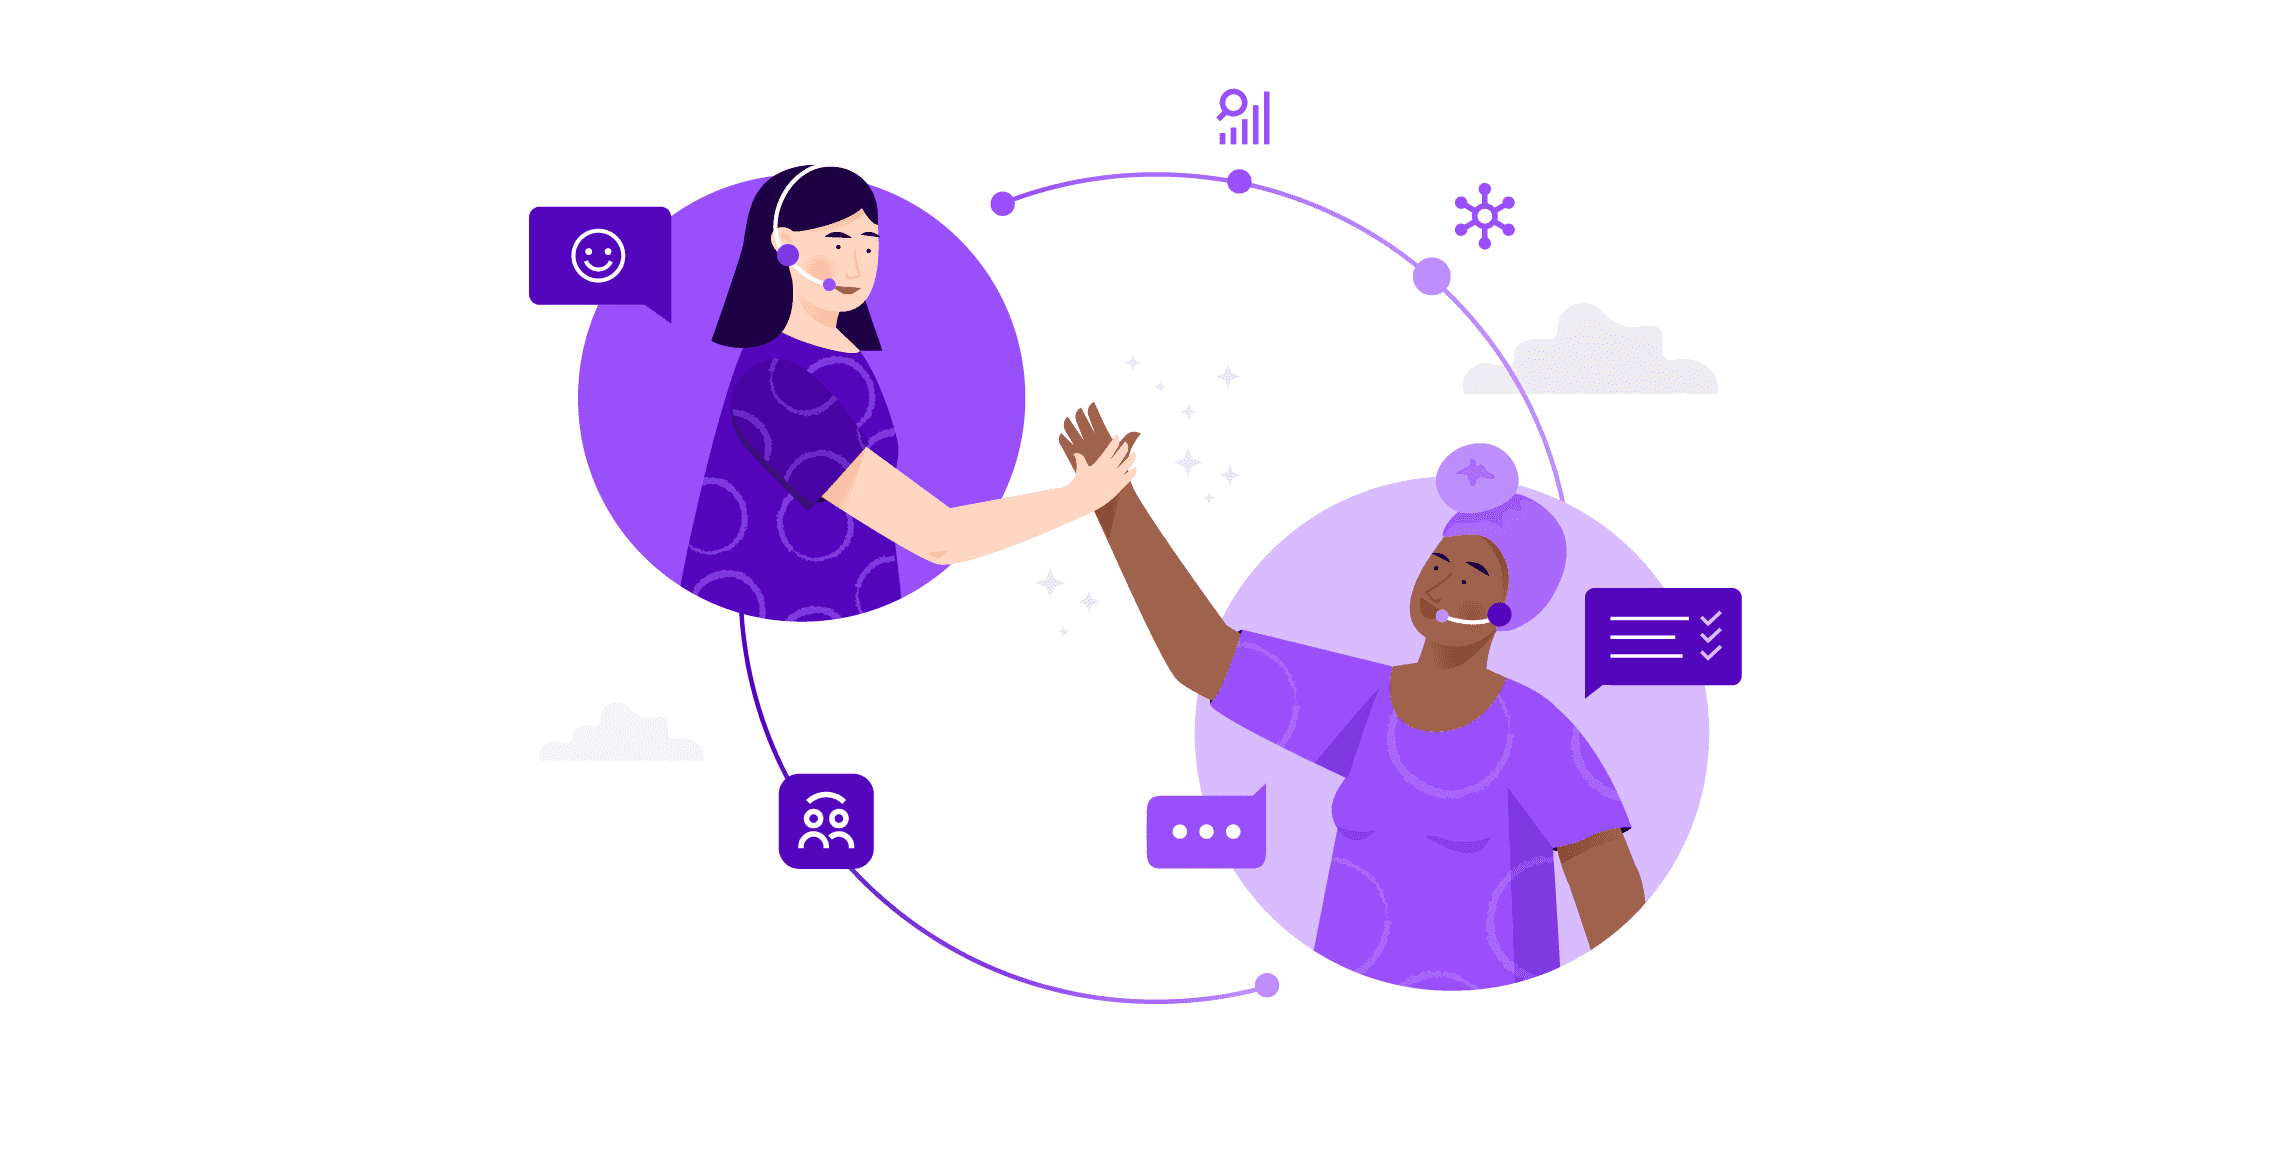 An illustration of two customer service representatives high-fiving